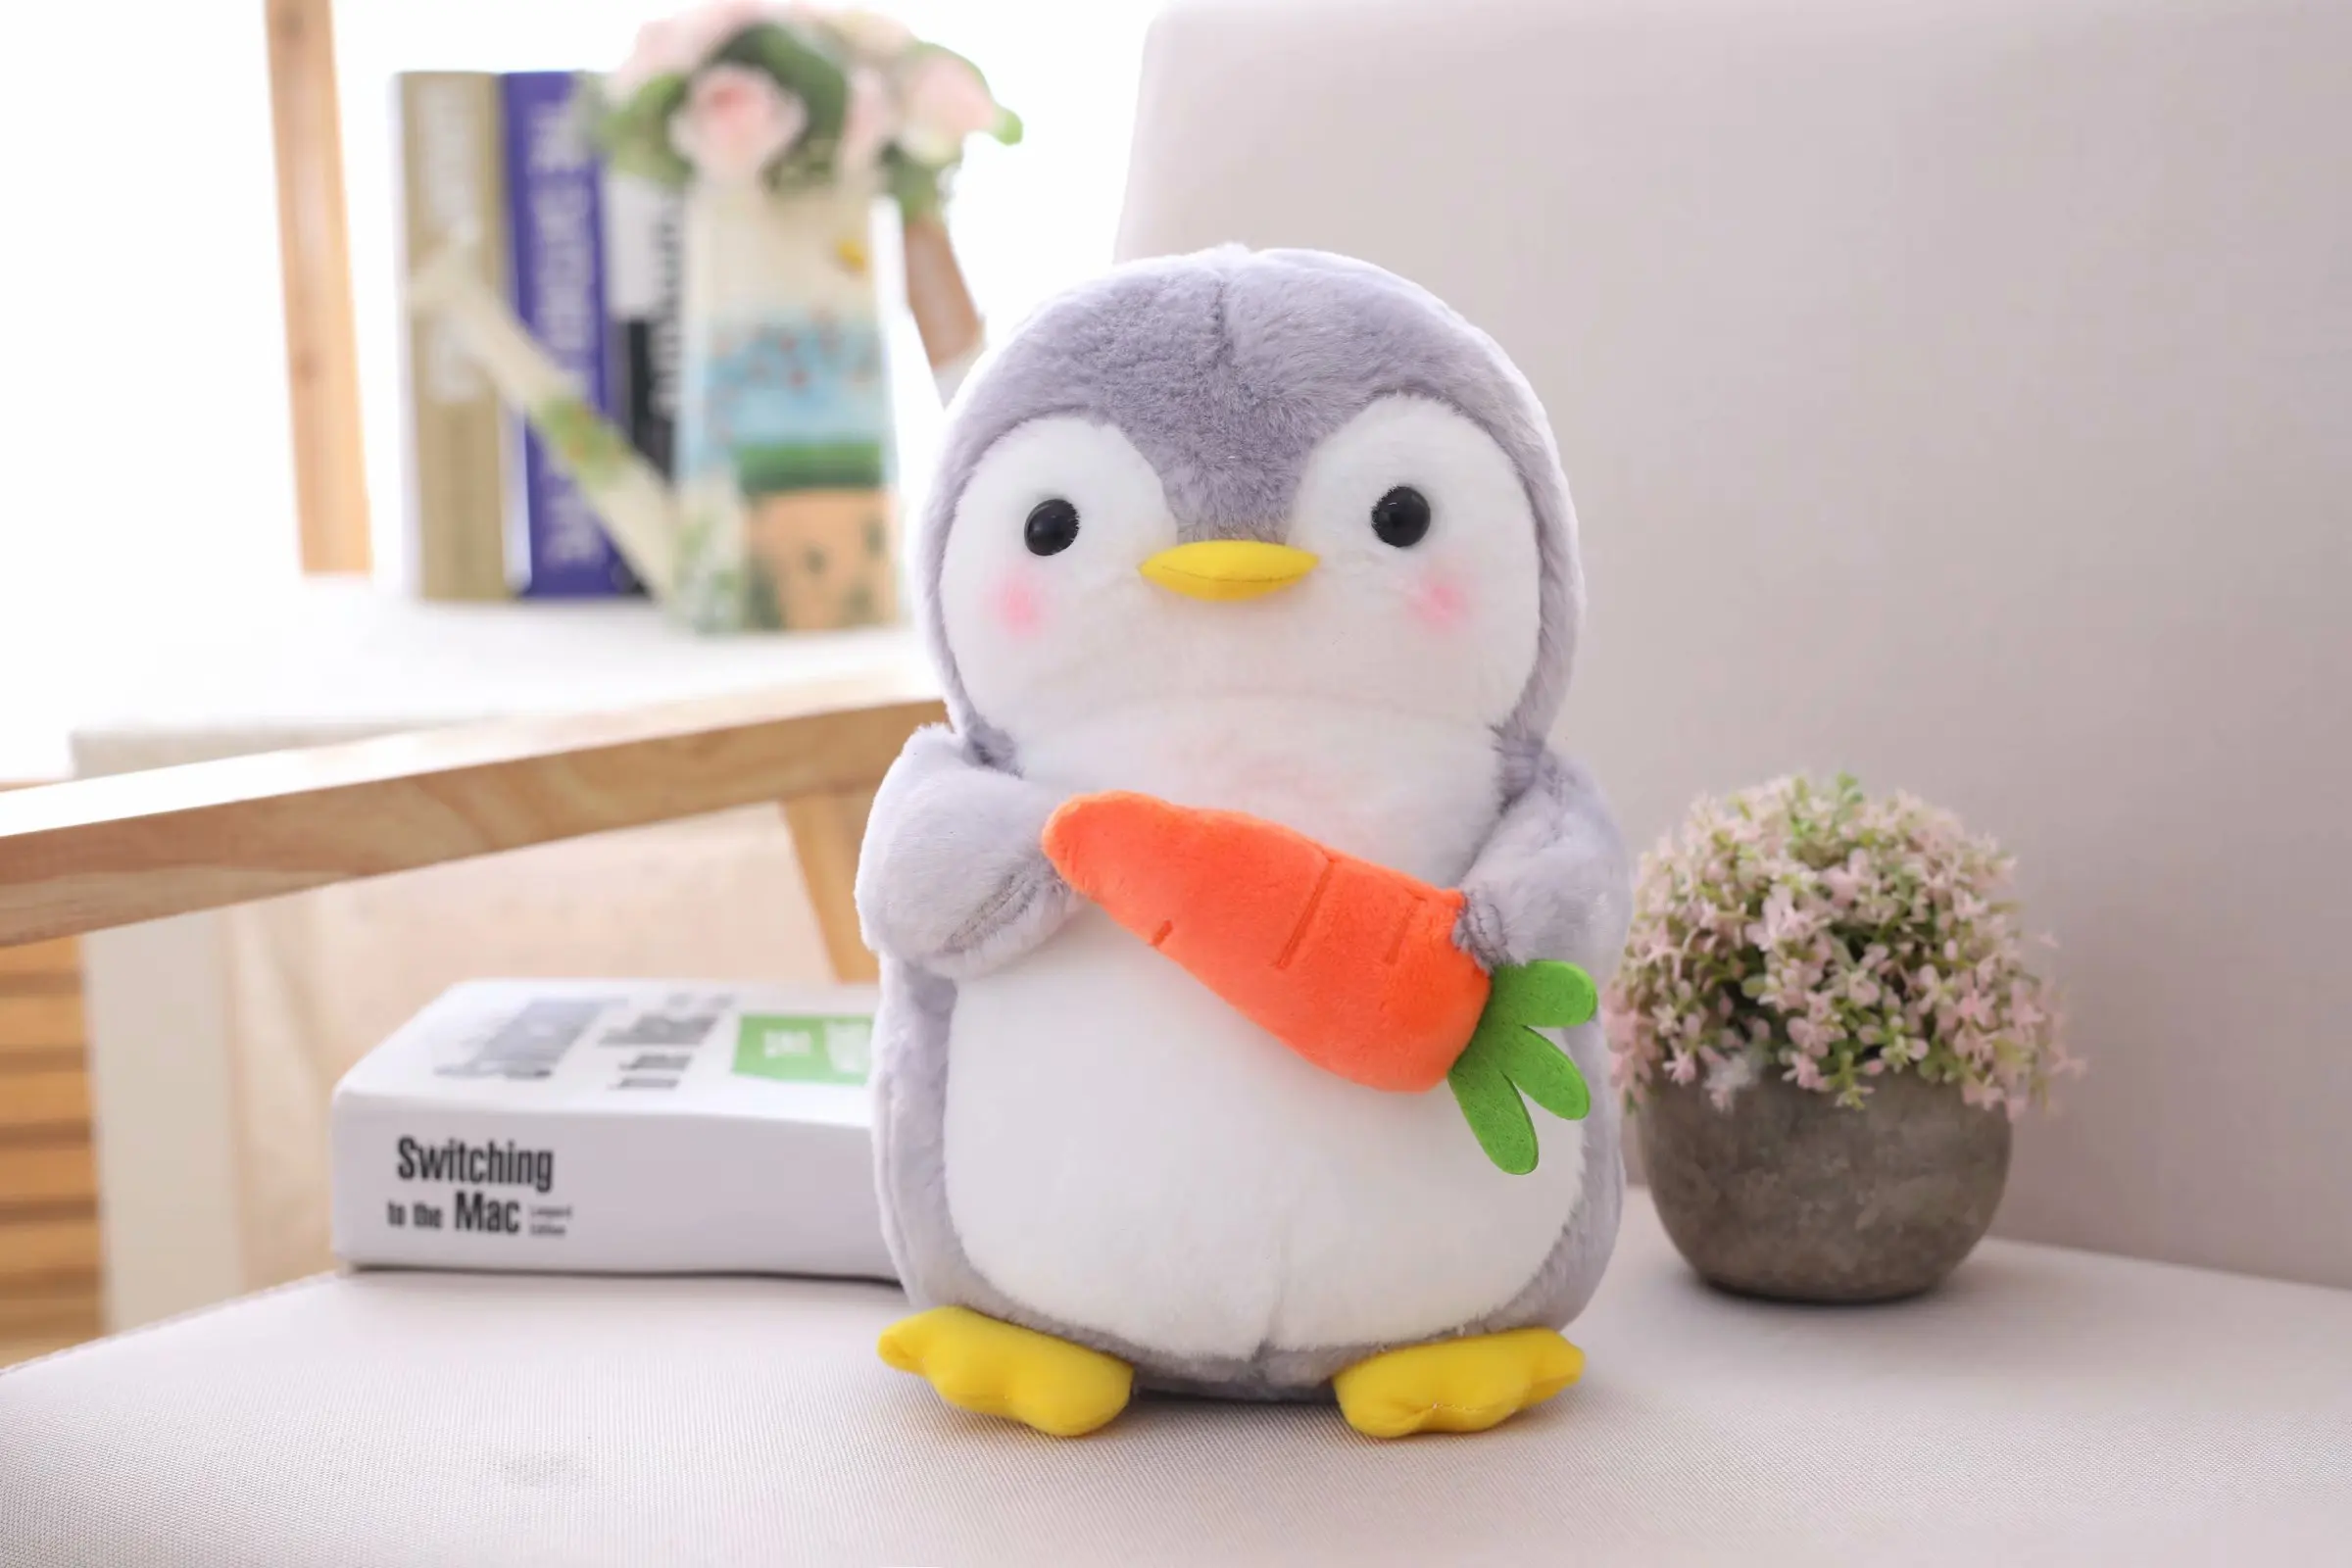 Kawaii Therapy Penguin Fruit Plush - Limited Edition